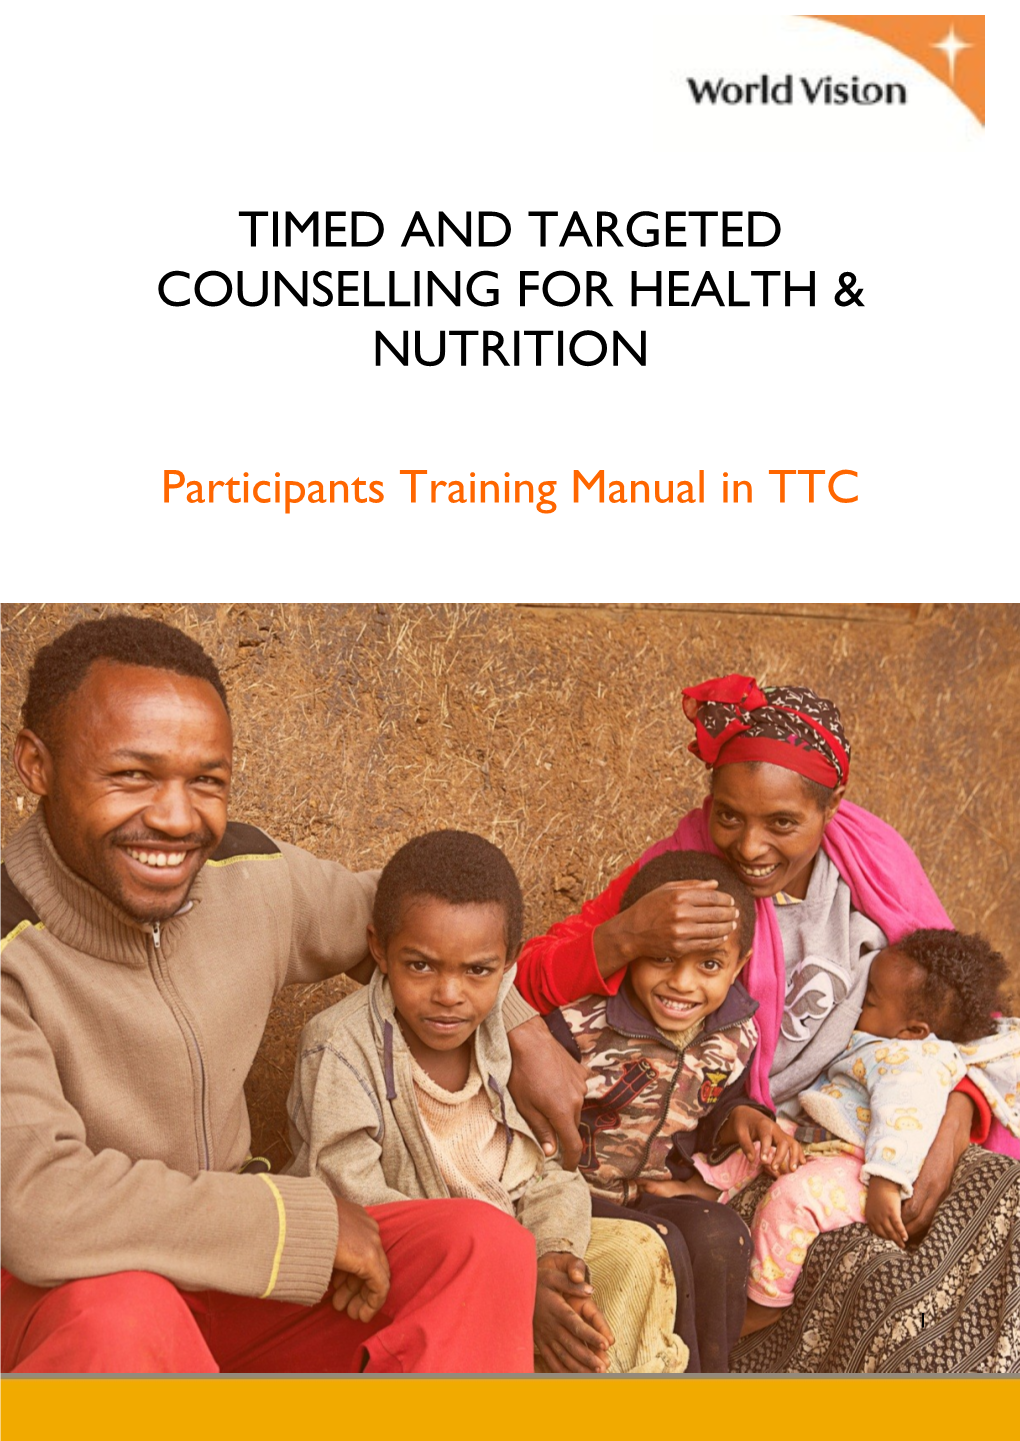 Timed and Targeted Counselling for Health & Nutrition